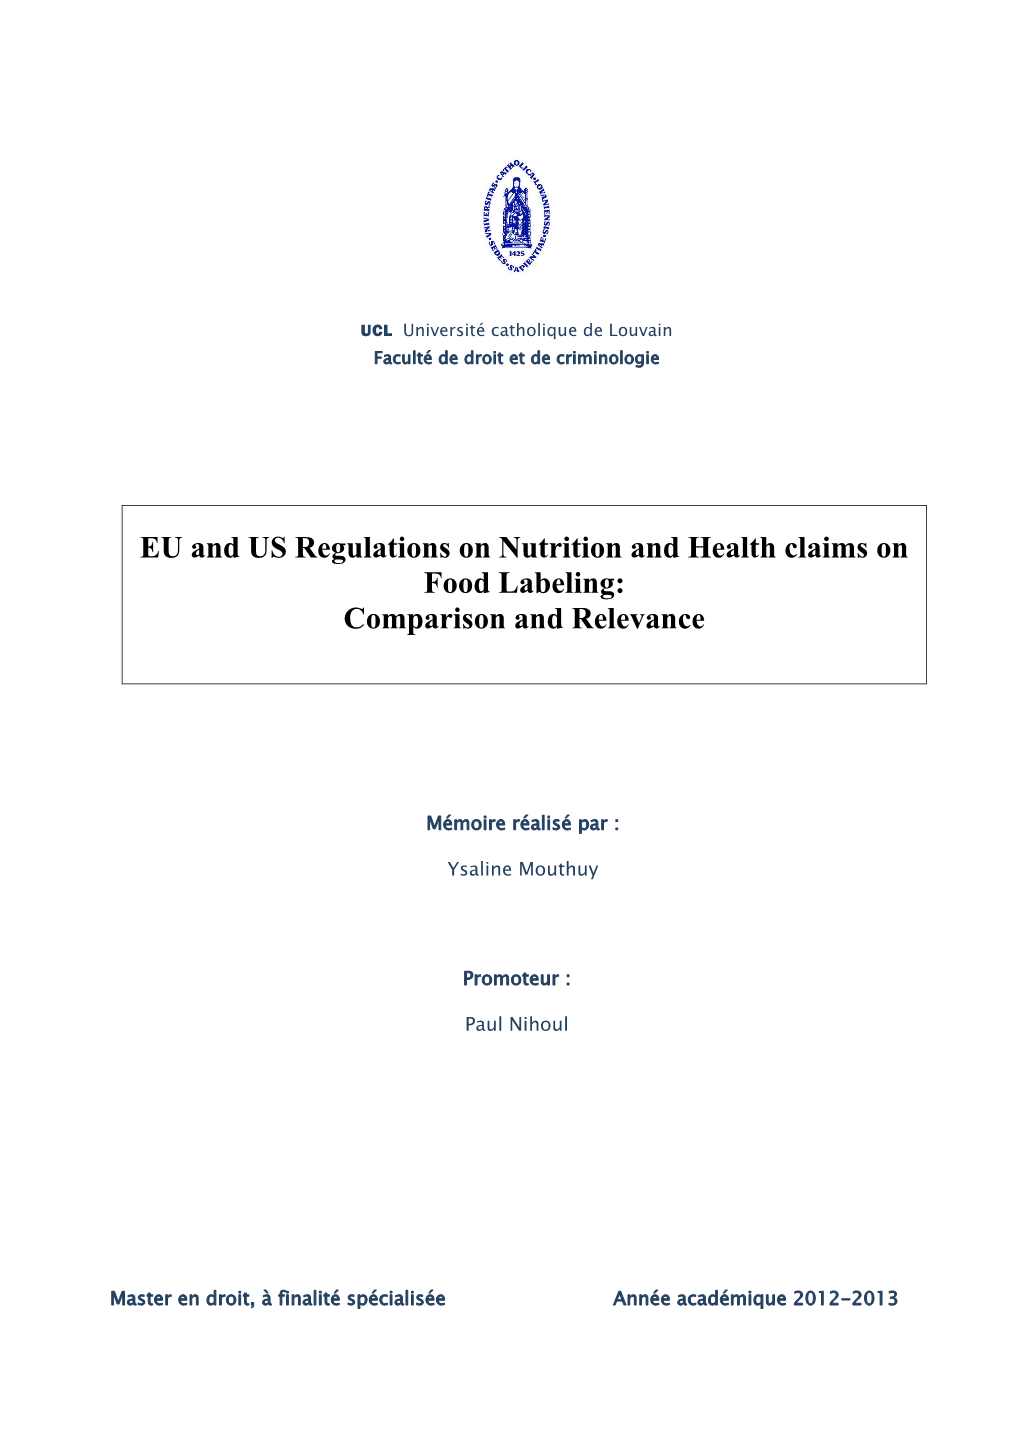 EU and US Regulations on Nutrition and Health Claims on Food Labeling: Comparison and Relevance